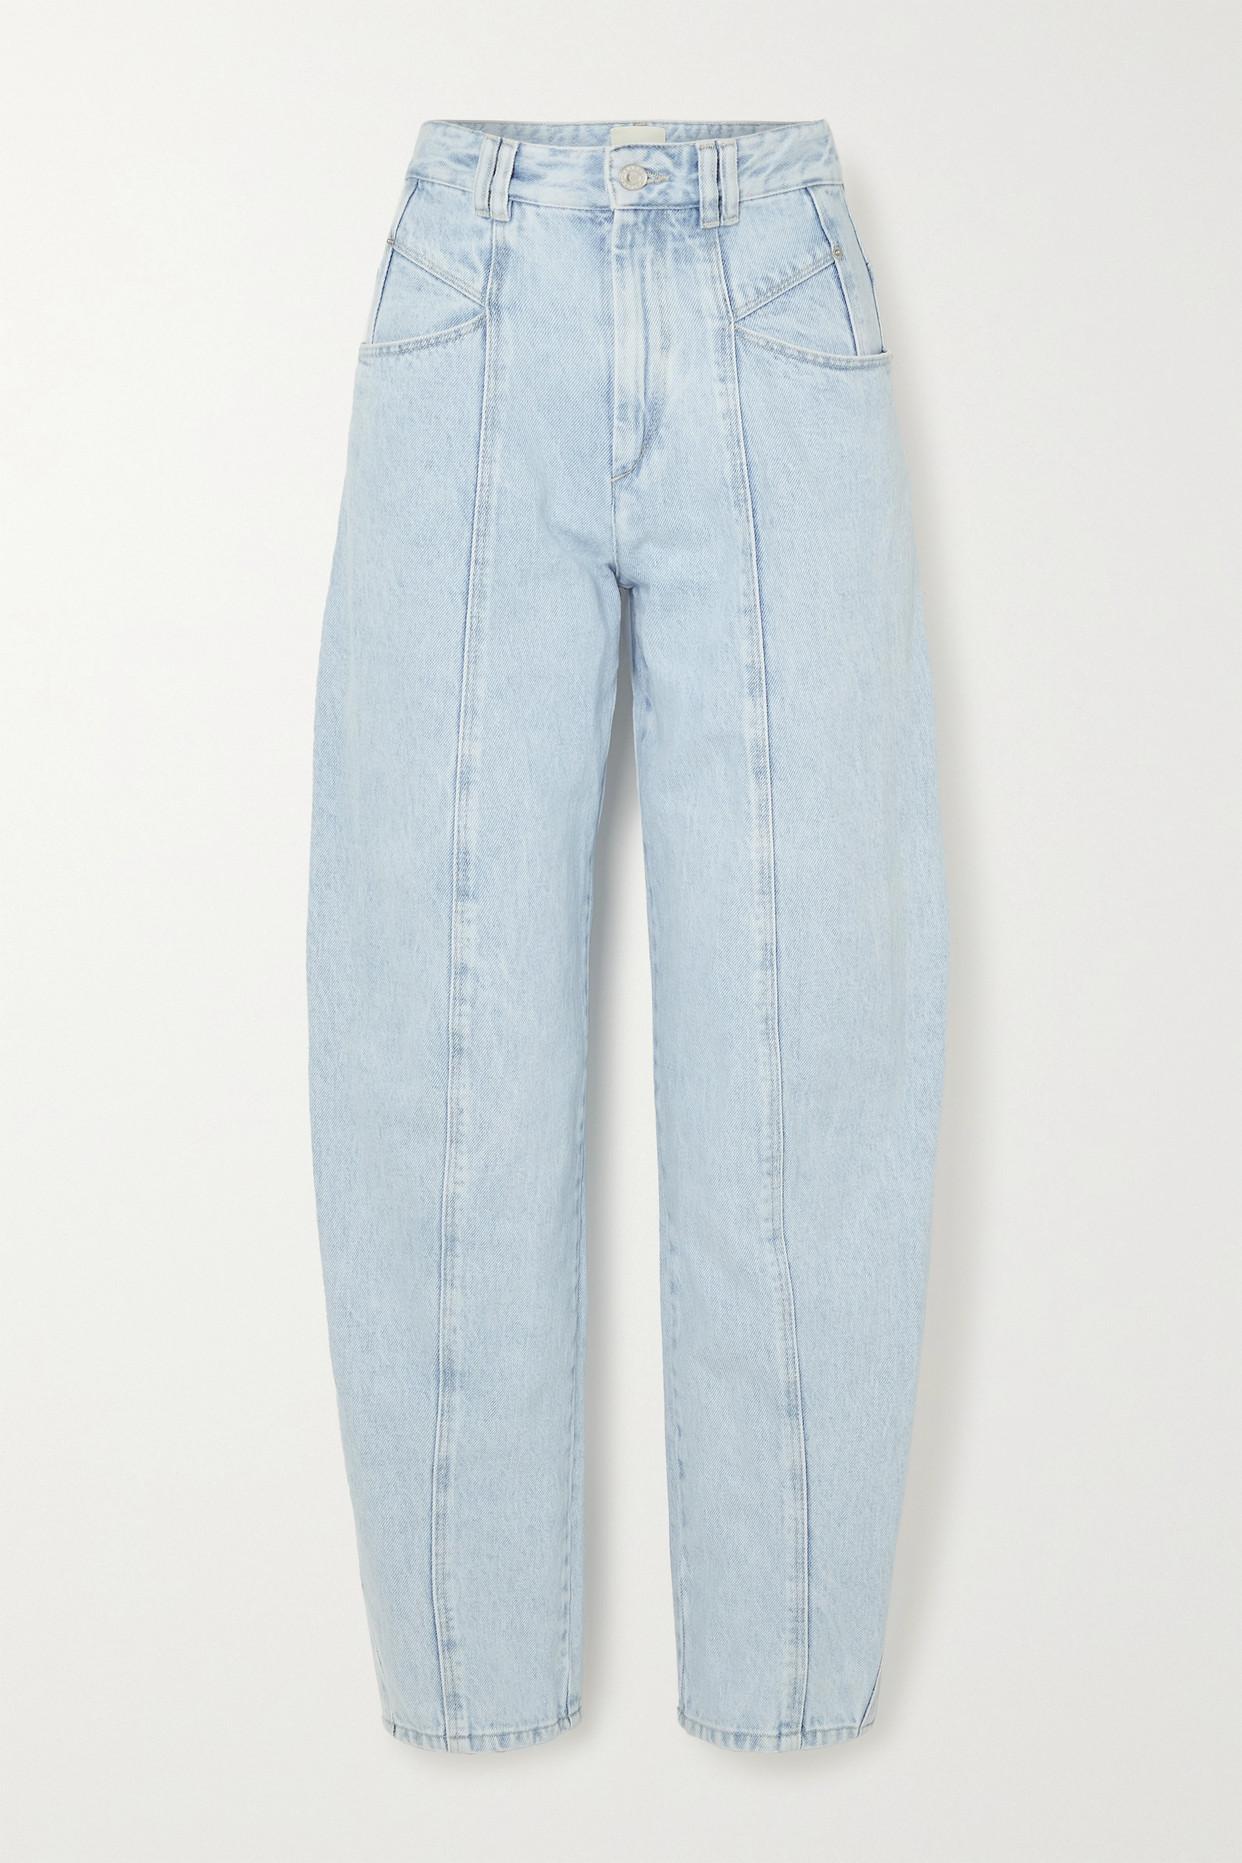 Isabel Marant Vetan Tapered Jeans in Blue | Lyst